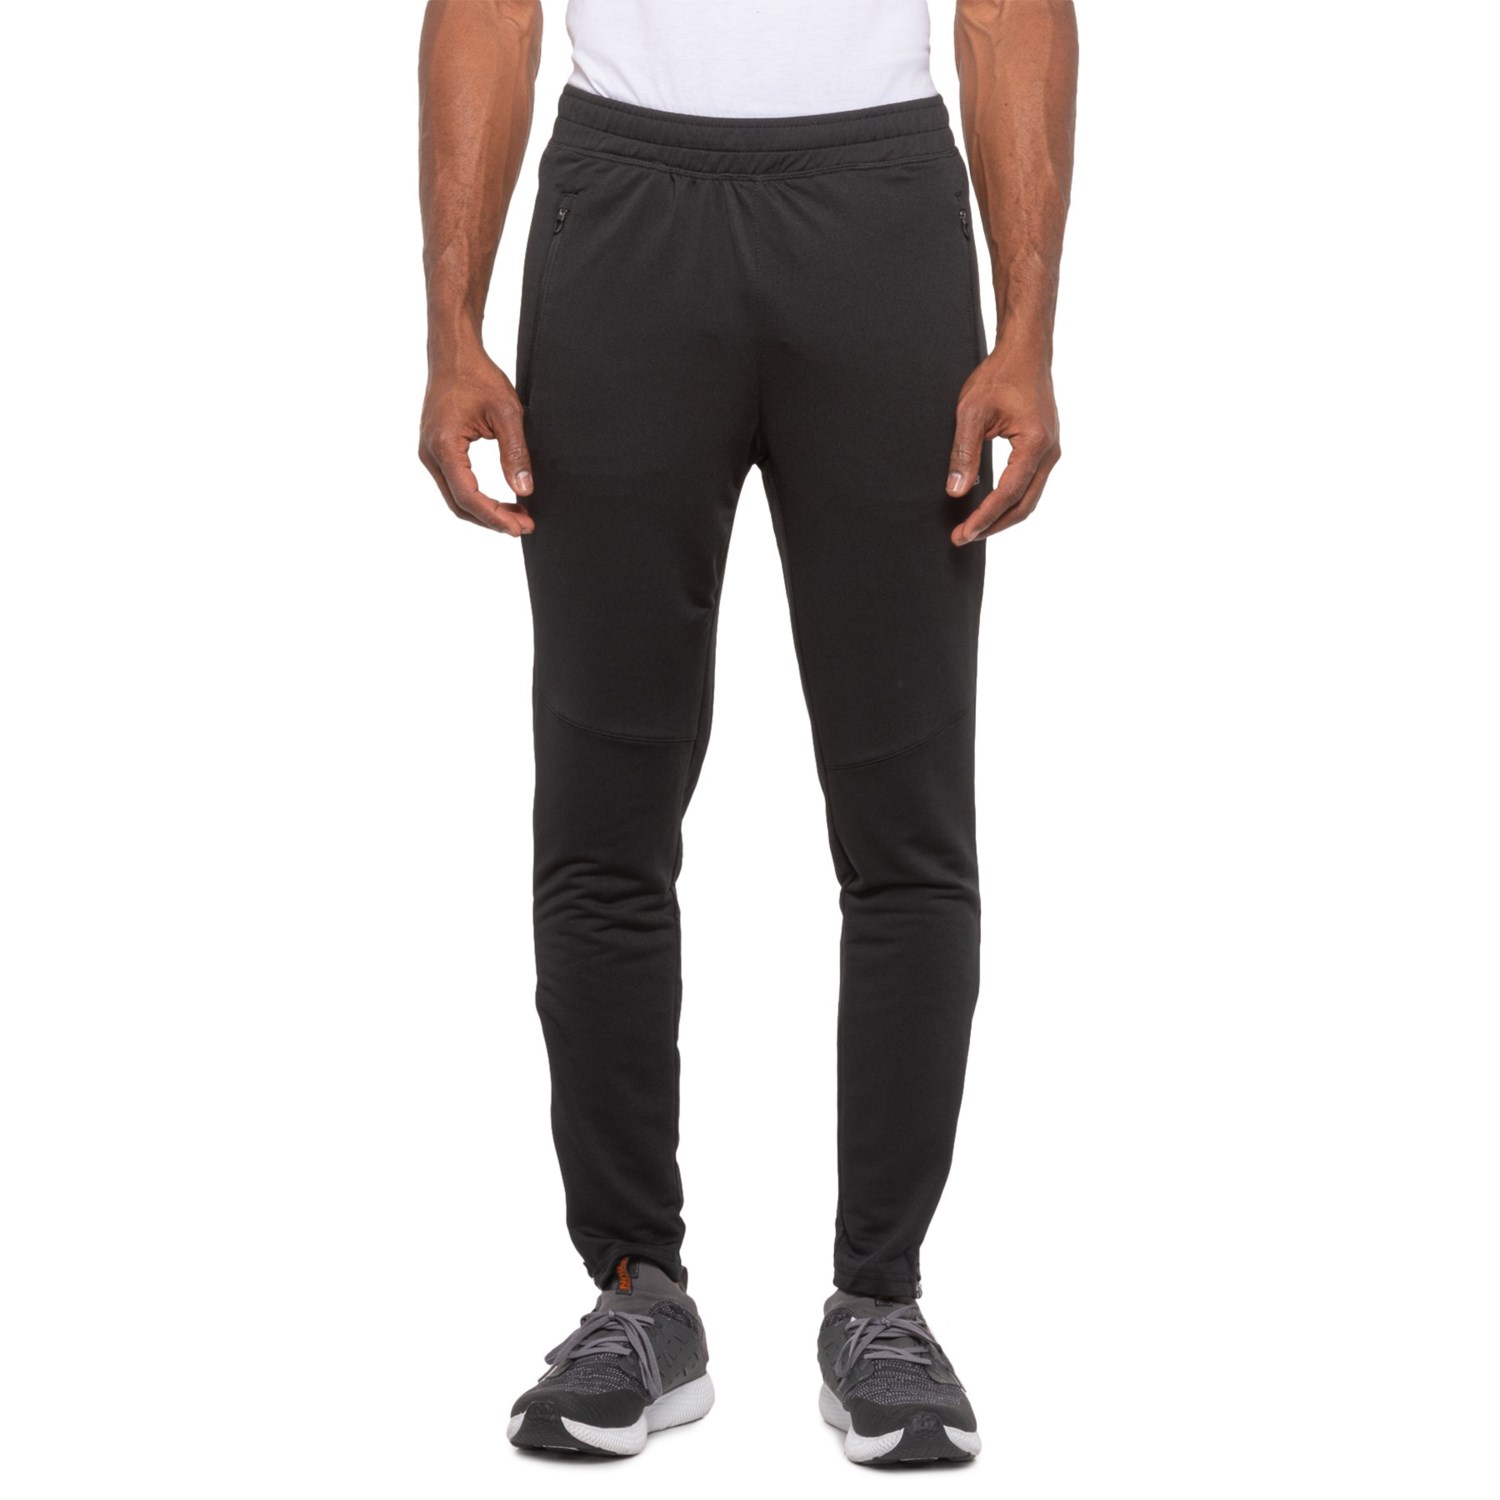 Hind Tech Terry Pants (For Men) - Save 25%